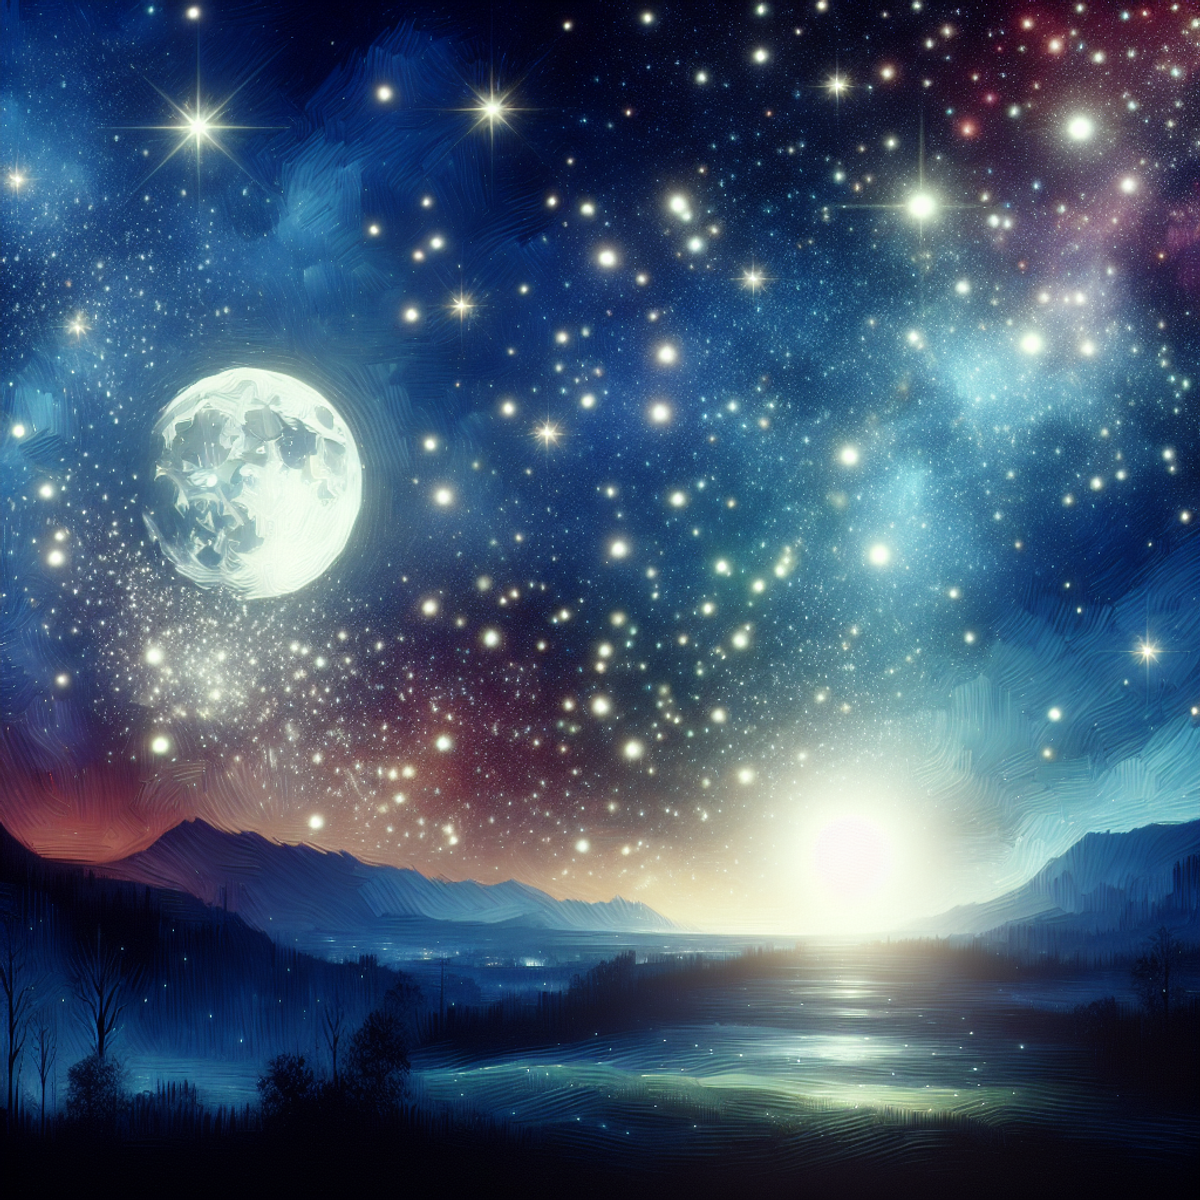 A serene late night sky filled with shimmering stars and a radiant, luminous moon casting gentle light onto a serene world below.